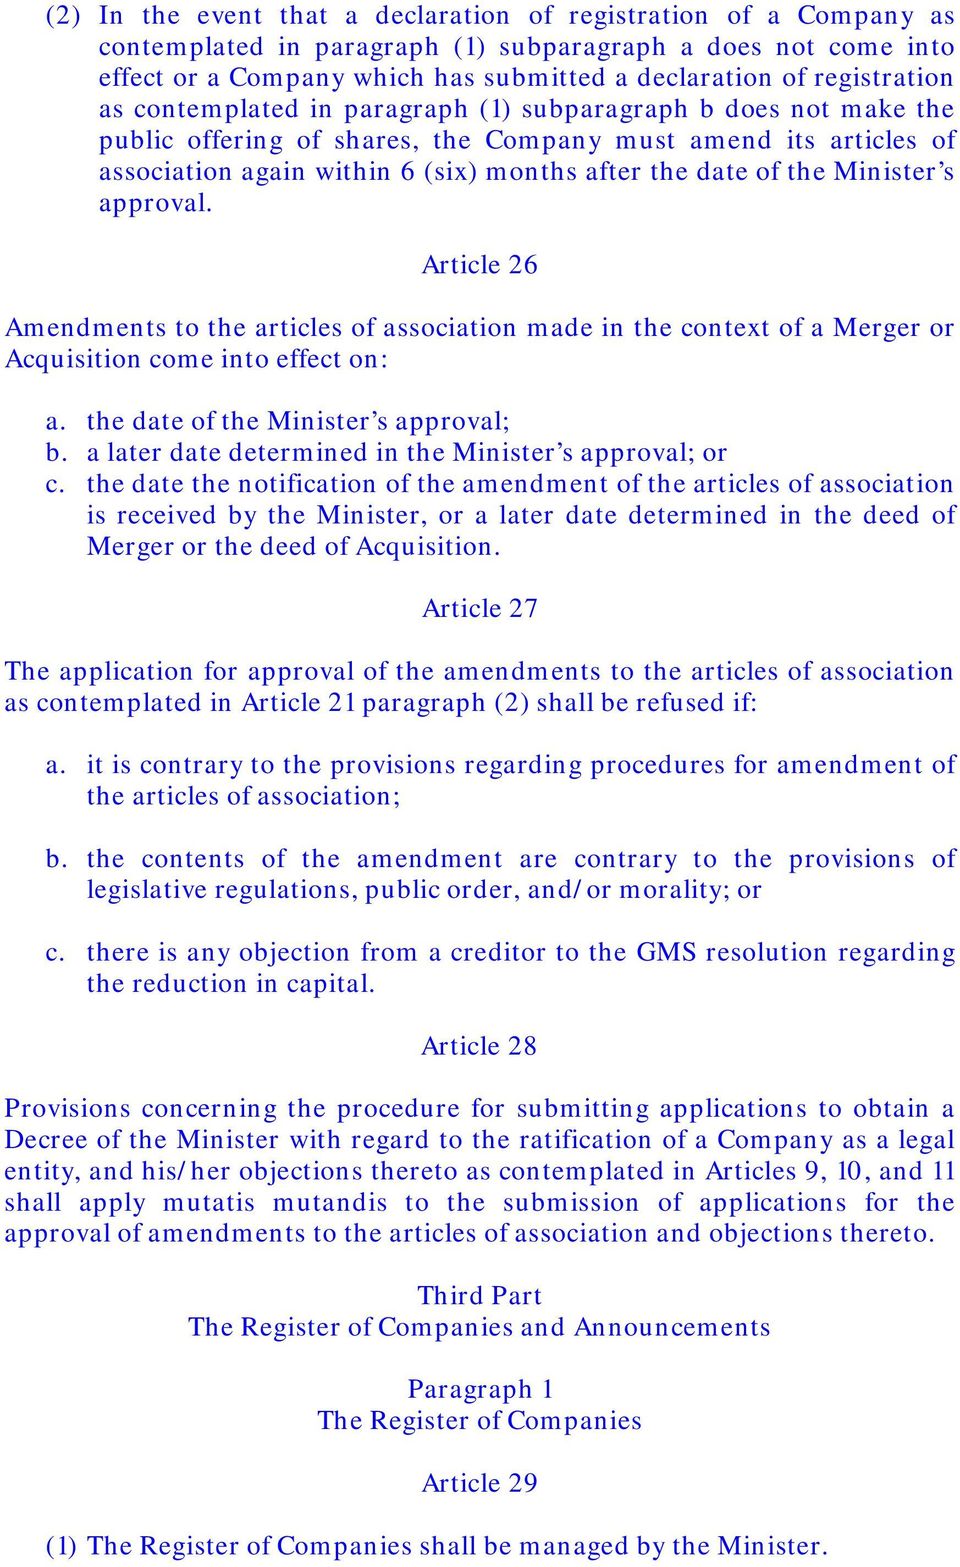 of the Minister s approval. Article 26 Amendments to the articles of association made in the context of a Merger or Acquisition come into effect on: a. the date of the Minister s approval; b.